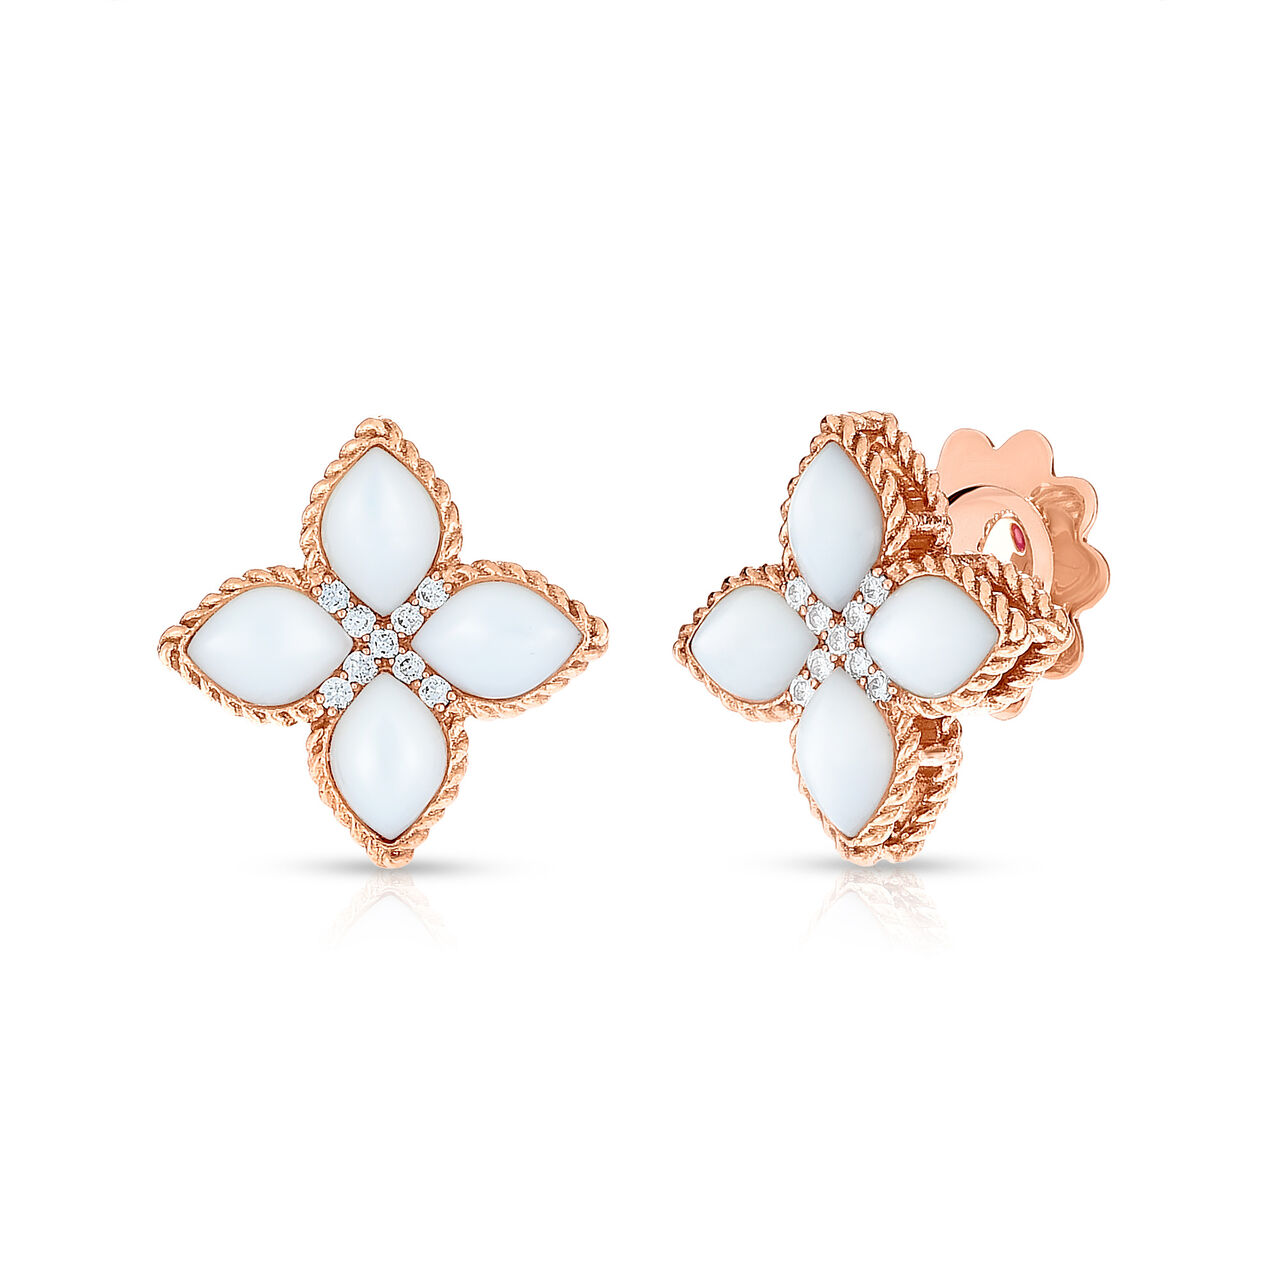 maison birks roberto coin venetian princess medium rose gold diamond and mother of pearls earrings image number 0